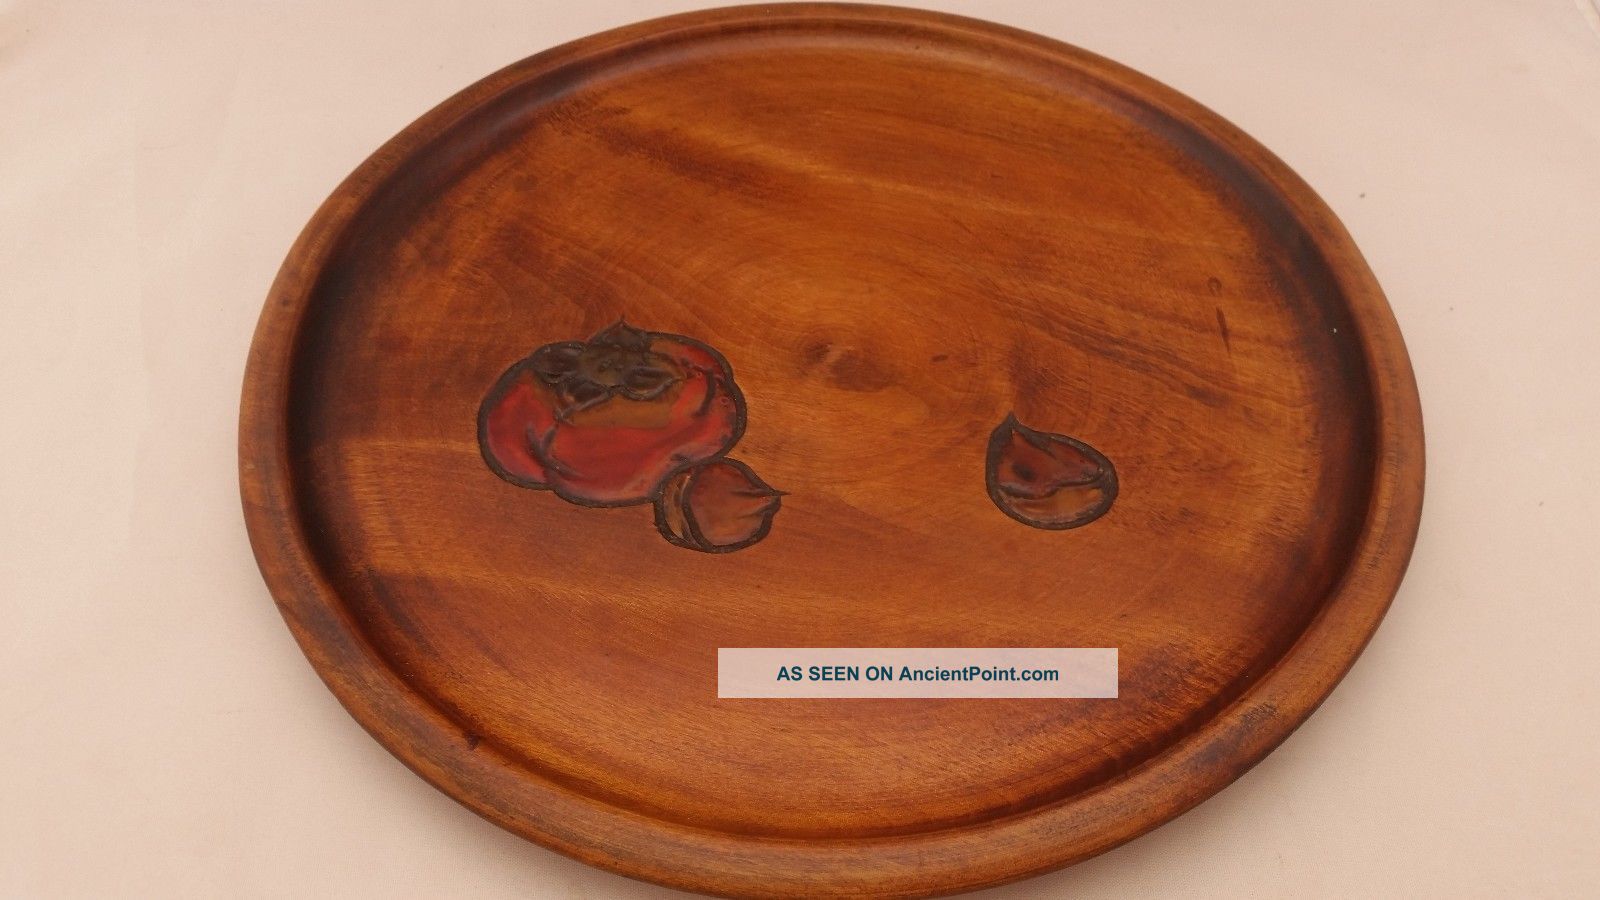 10 - Inch Vintage Japanese Wooden Tray Or Plate For Service Or Display Trays photo